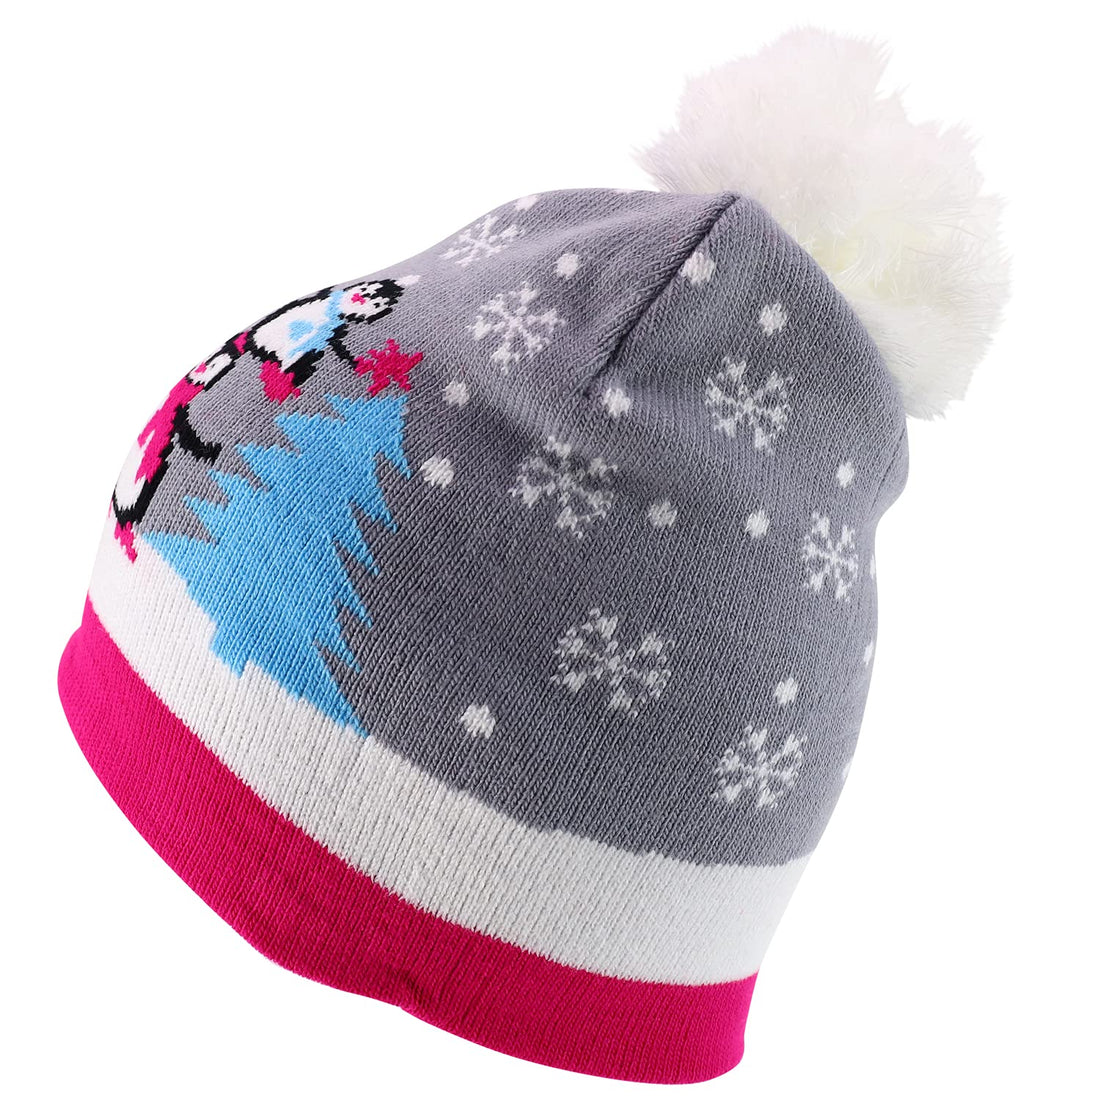 Trendy Apparel Shop 10 Styles Christmas Winter Short Beanies with Pompom